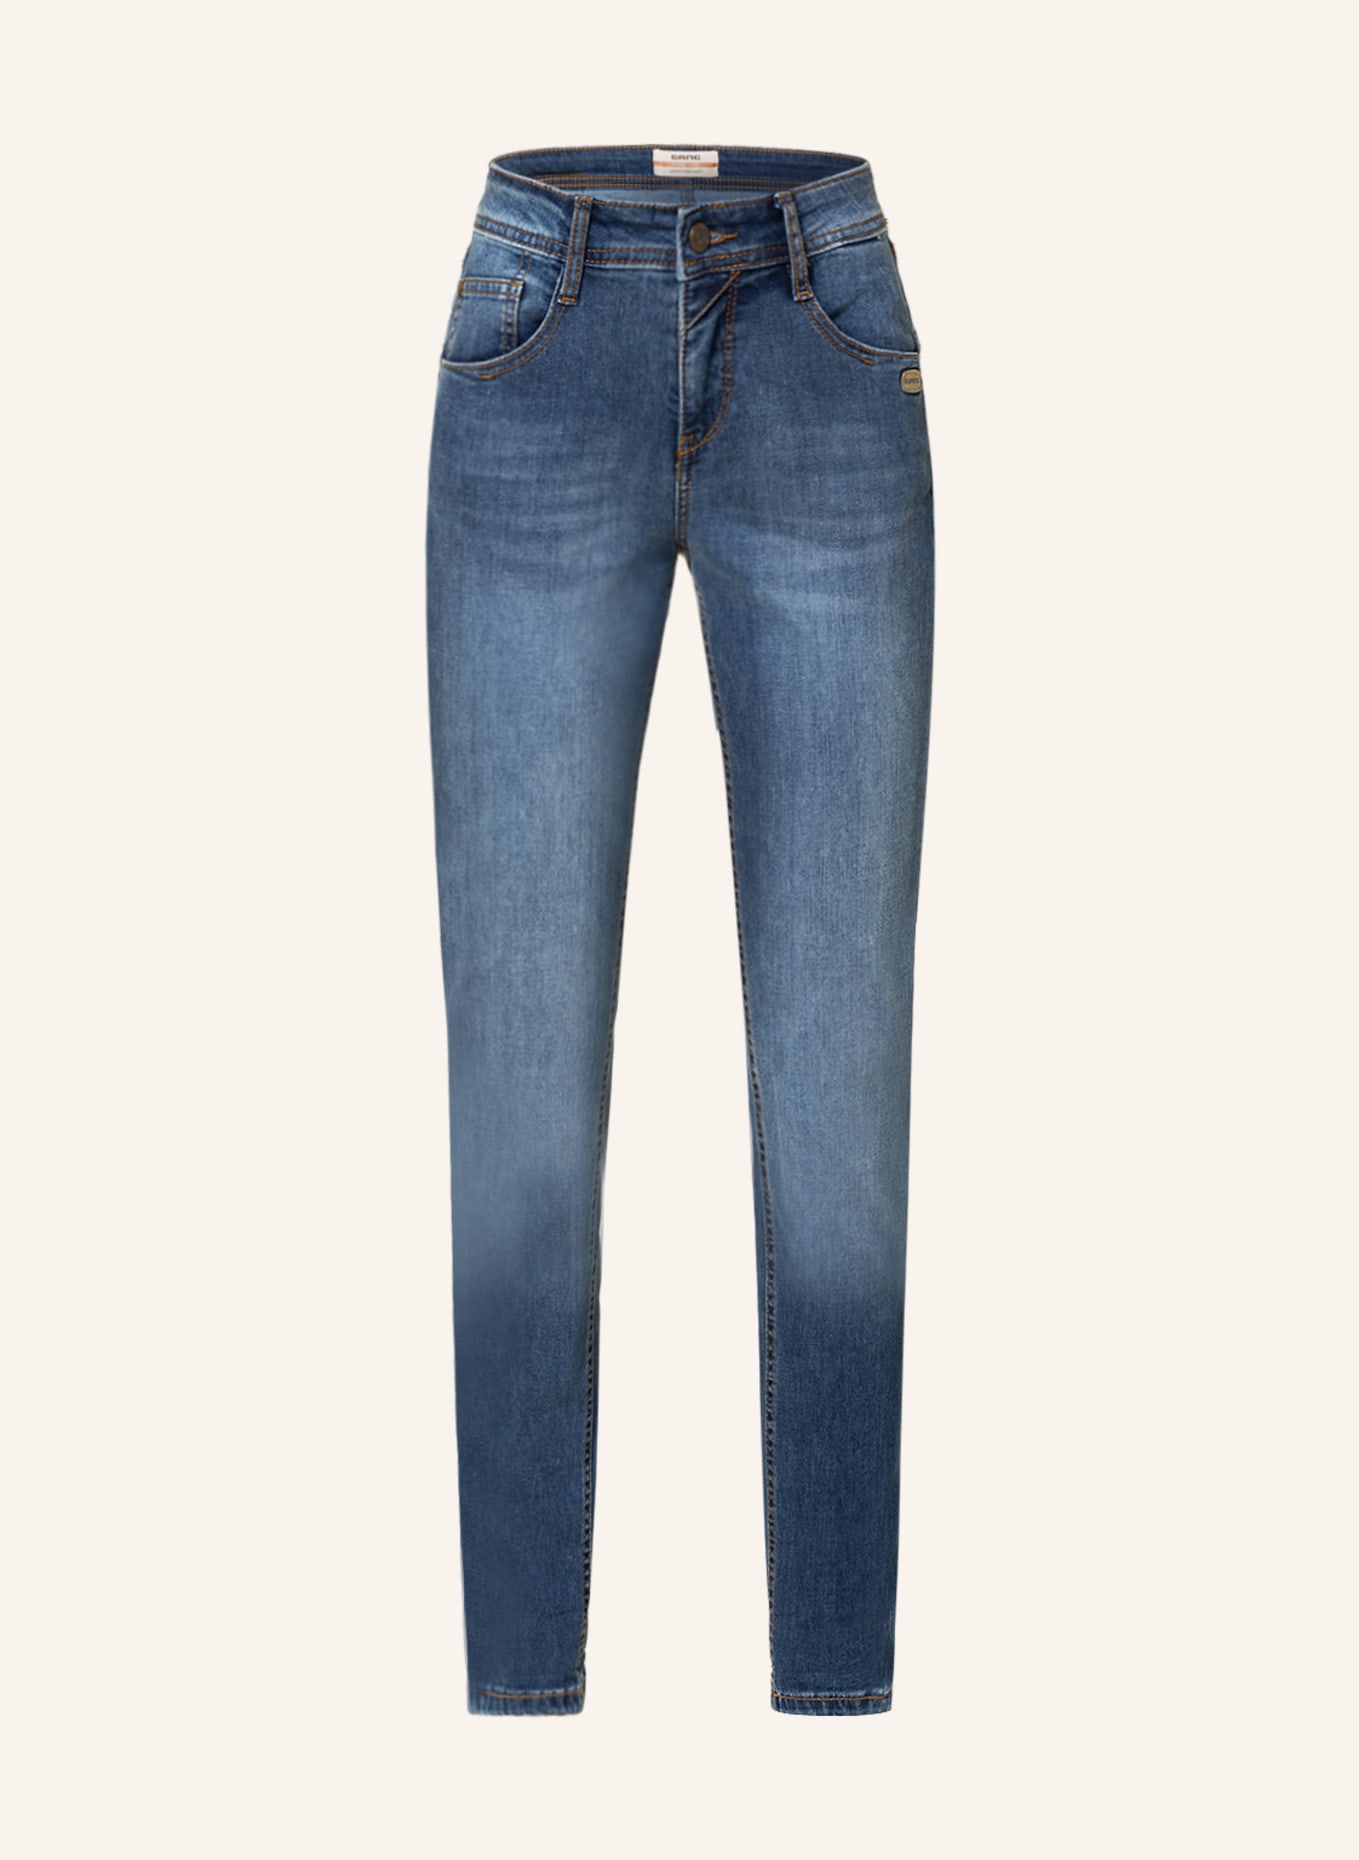 GANG Jeans AMELIE, Farbe: 7188 universal class wash(Bild null)